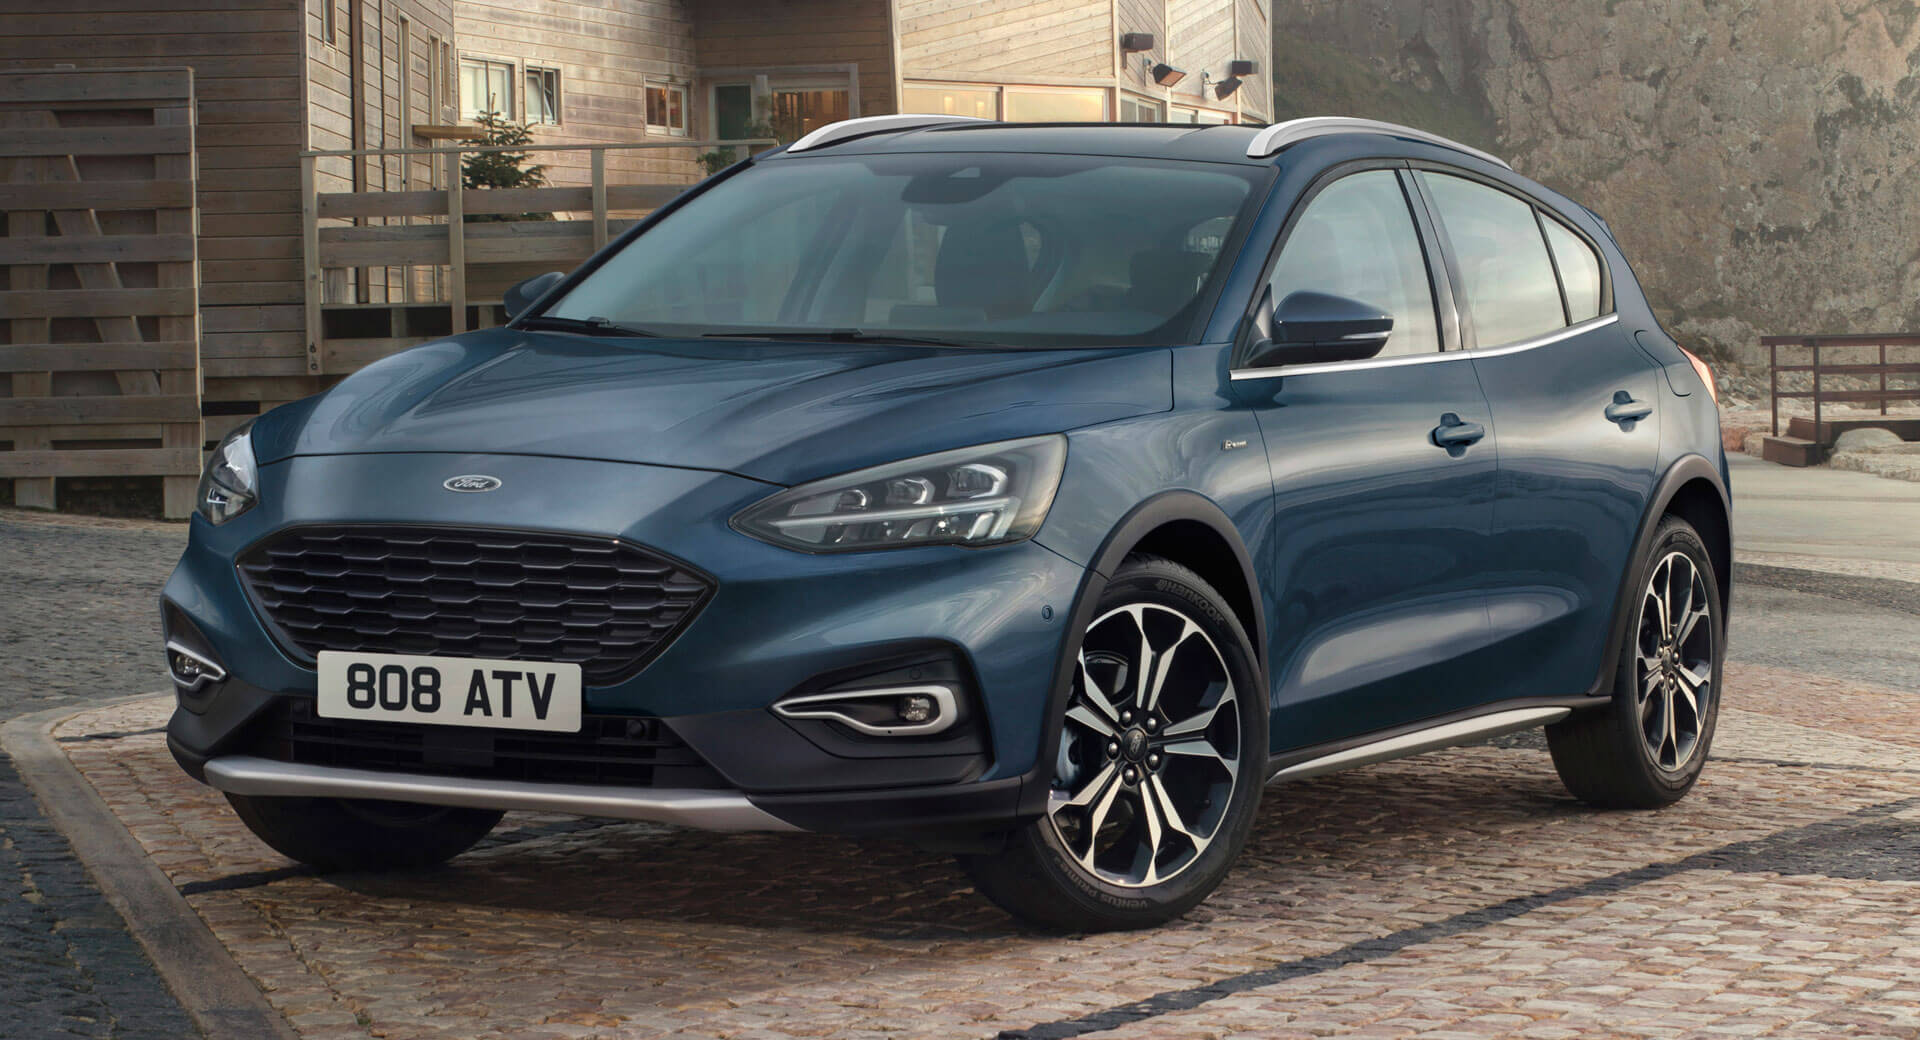 2020 Ford Focus Active X Tries An Upmarket Approach With New